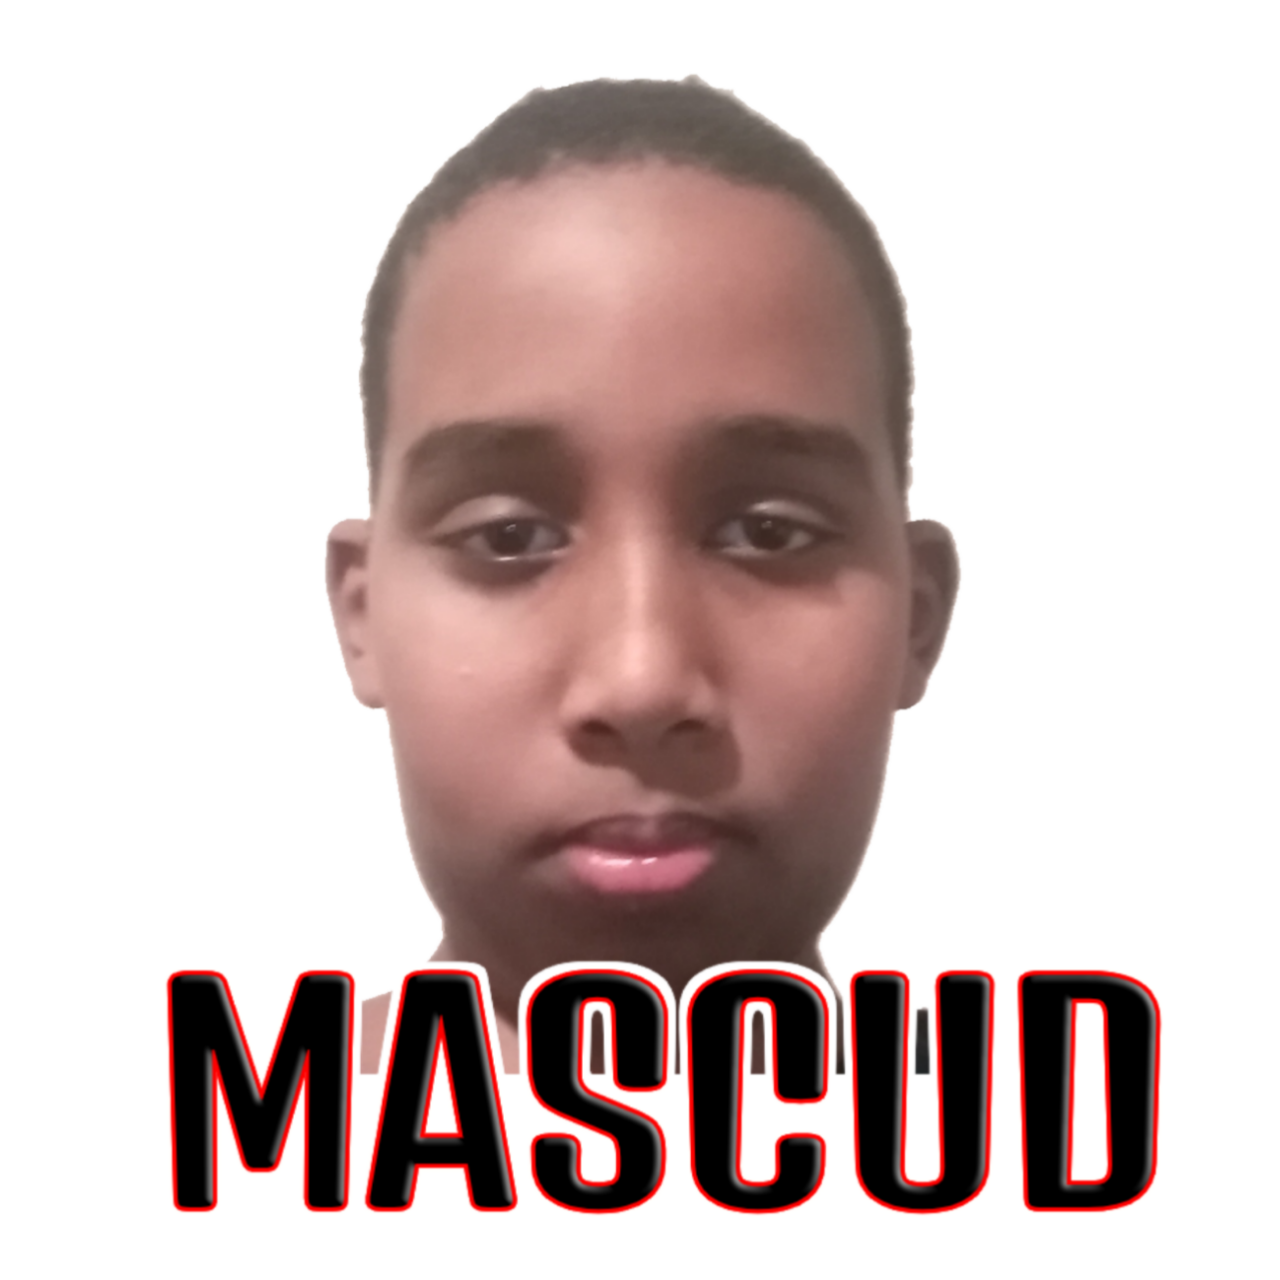 'The Mascud Face' by Mascud (12) from Dublin